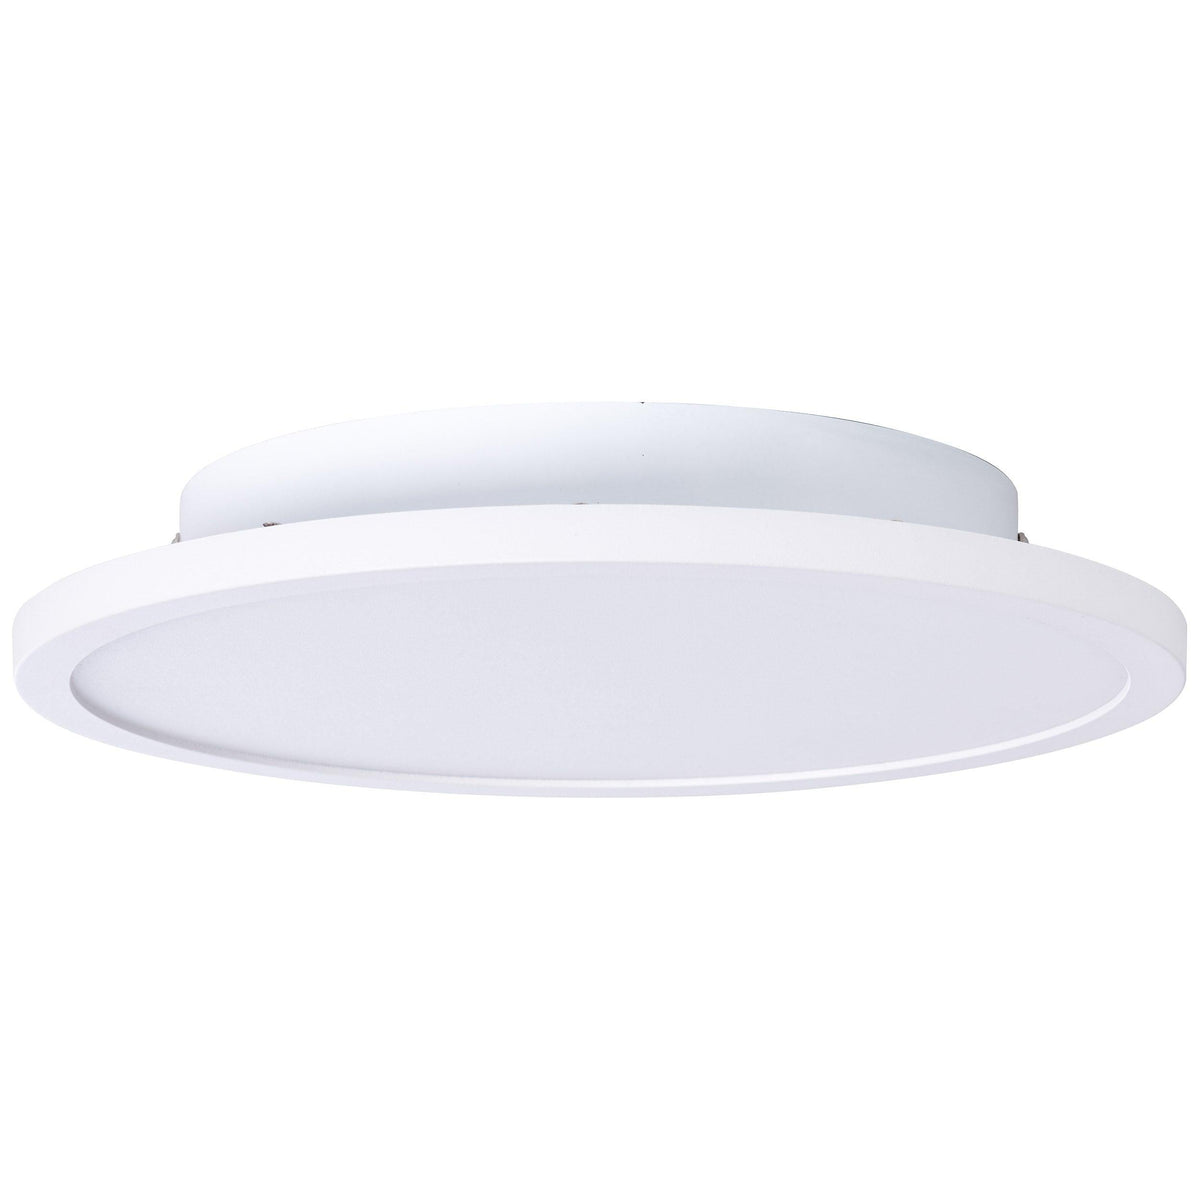 Brilliant 1 Light 12W Buffi LED Ceiling Panel - White | G96883A85 from DID Electrical - guaranteed Irish, guaranteed quality service. (6977603403964)